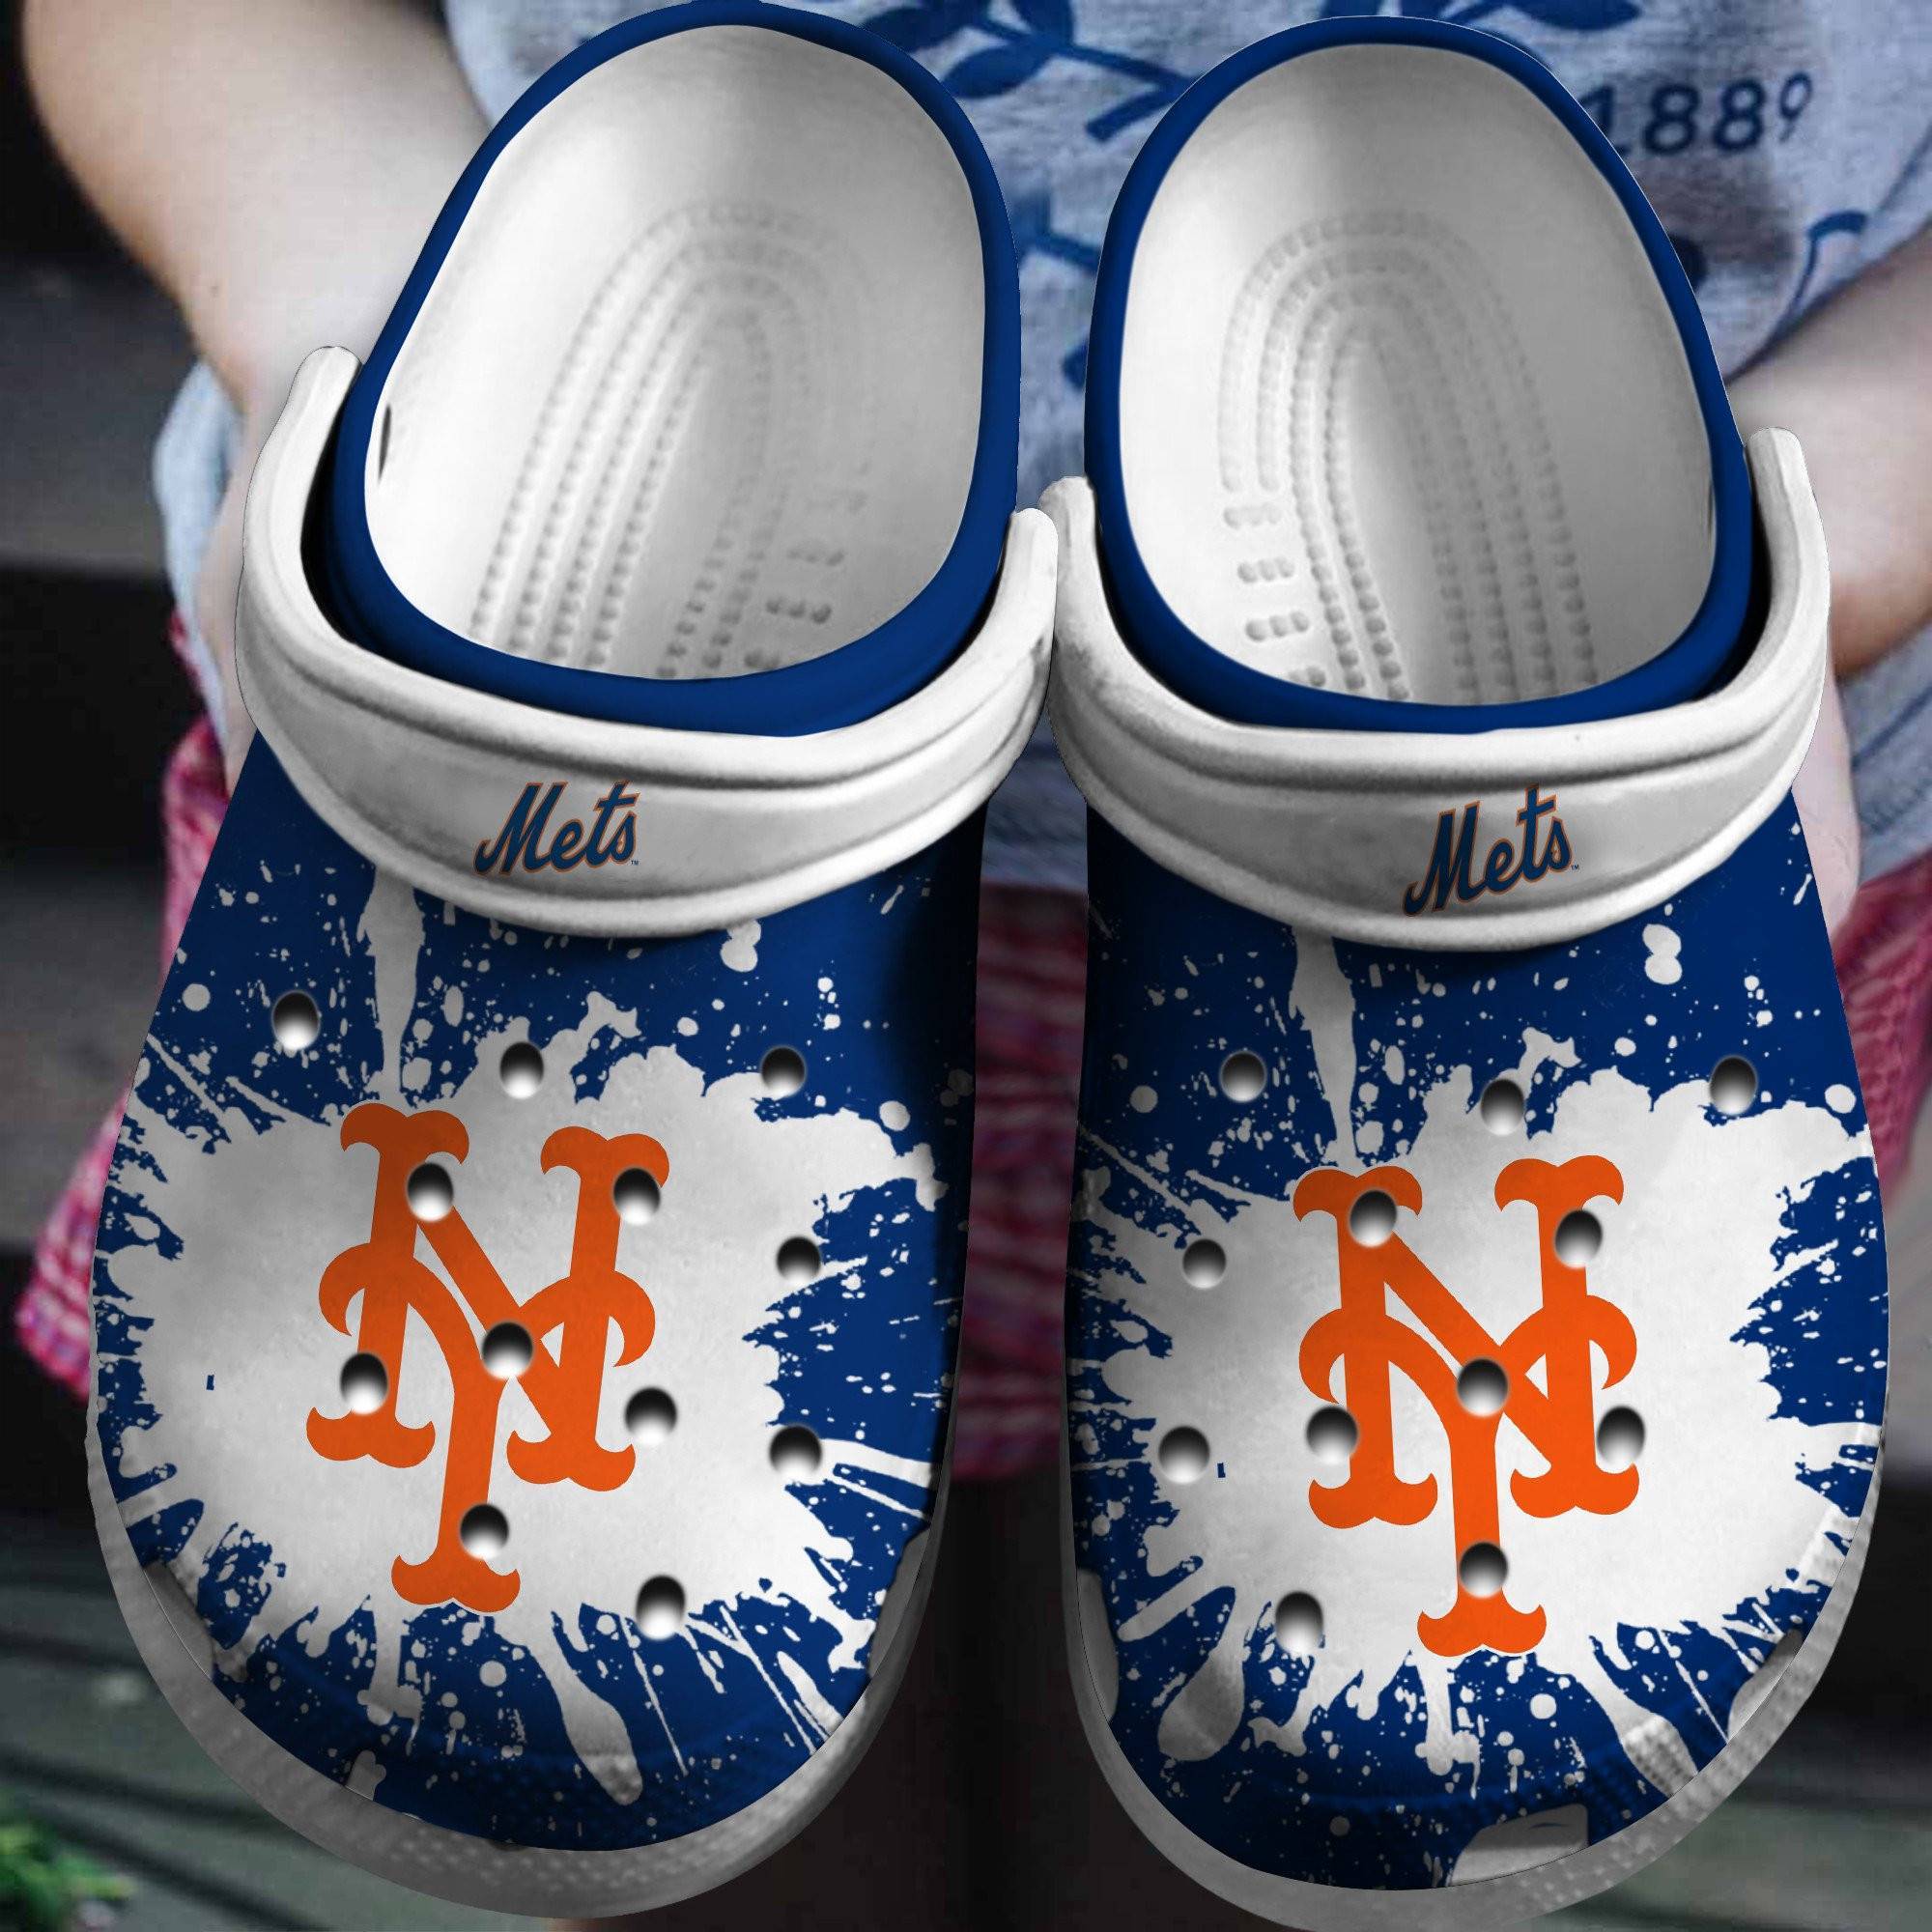 Hot Mlb Team New York Mets White – Blue Crocss Clog Shoesshoes